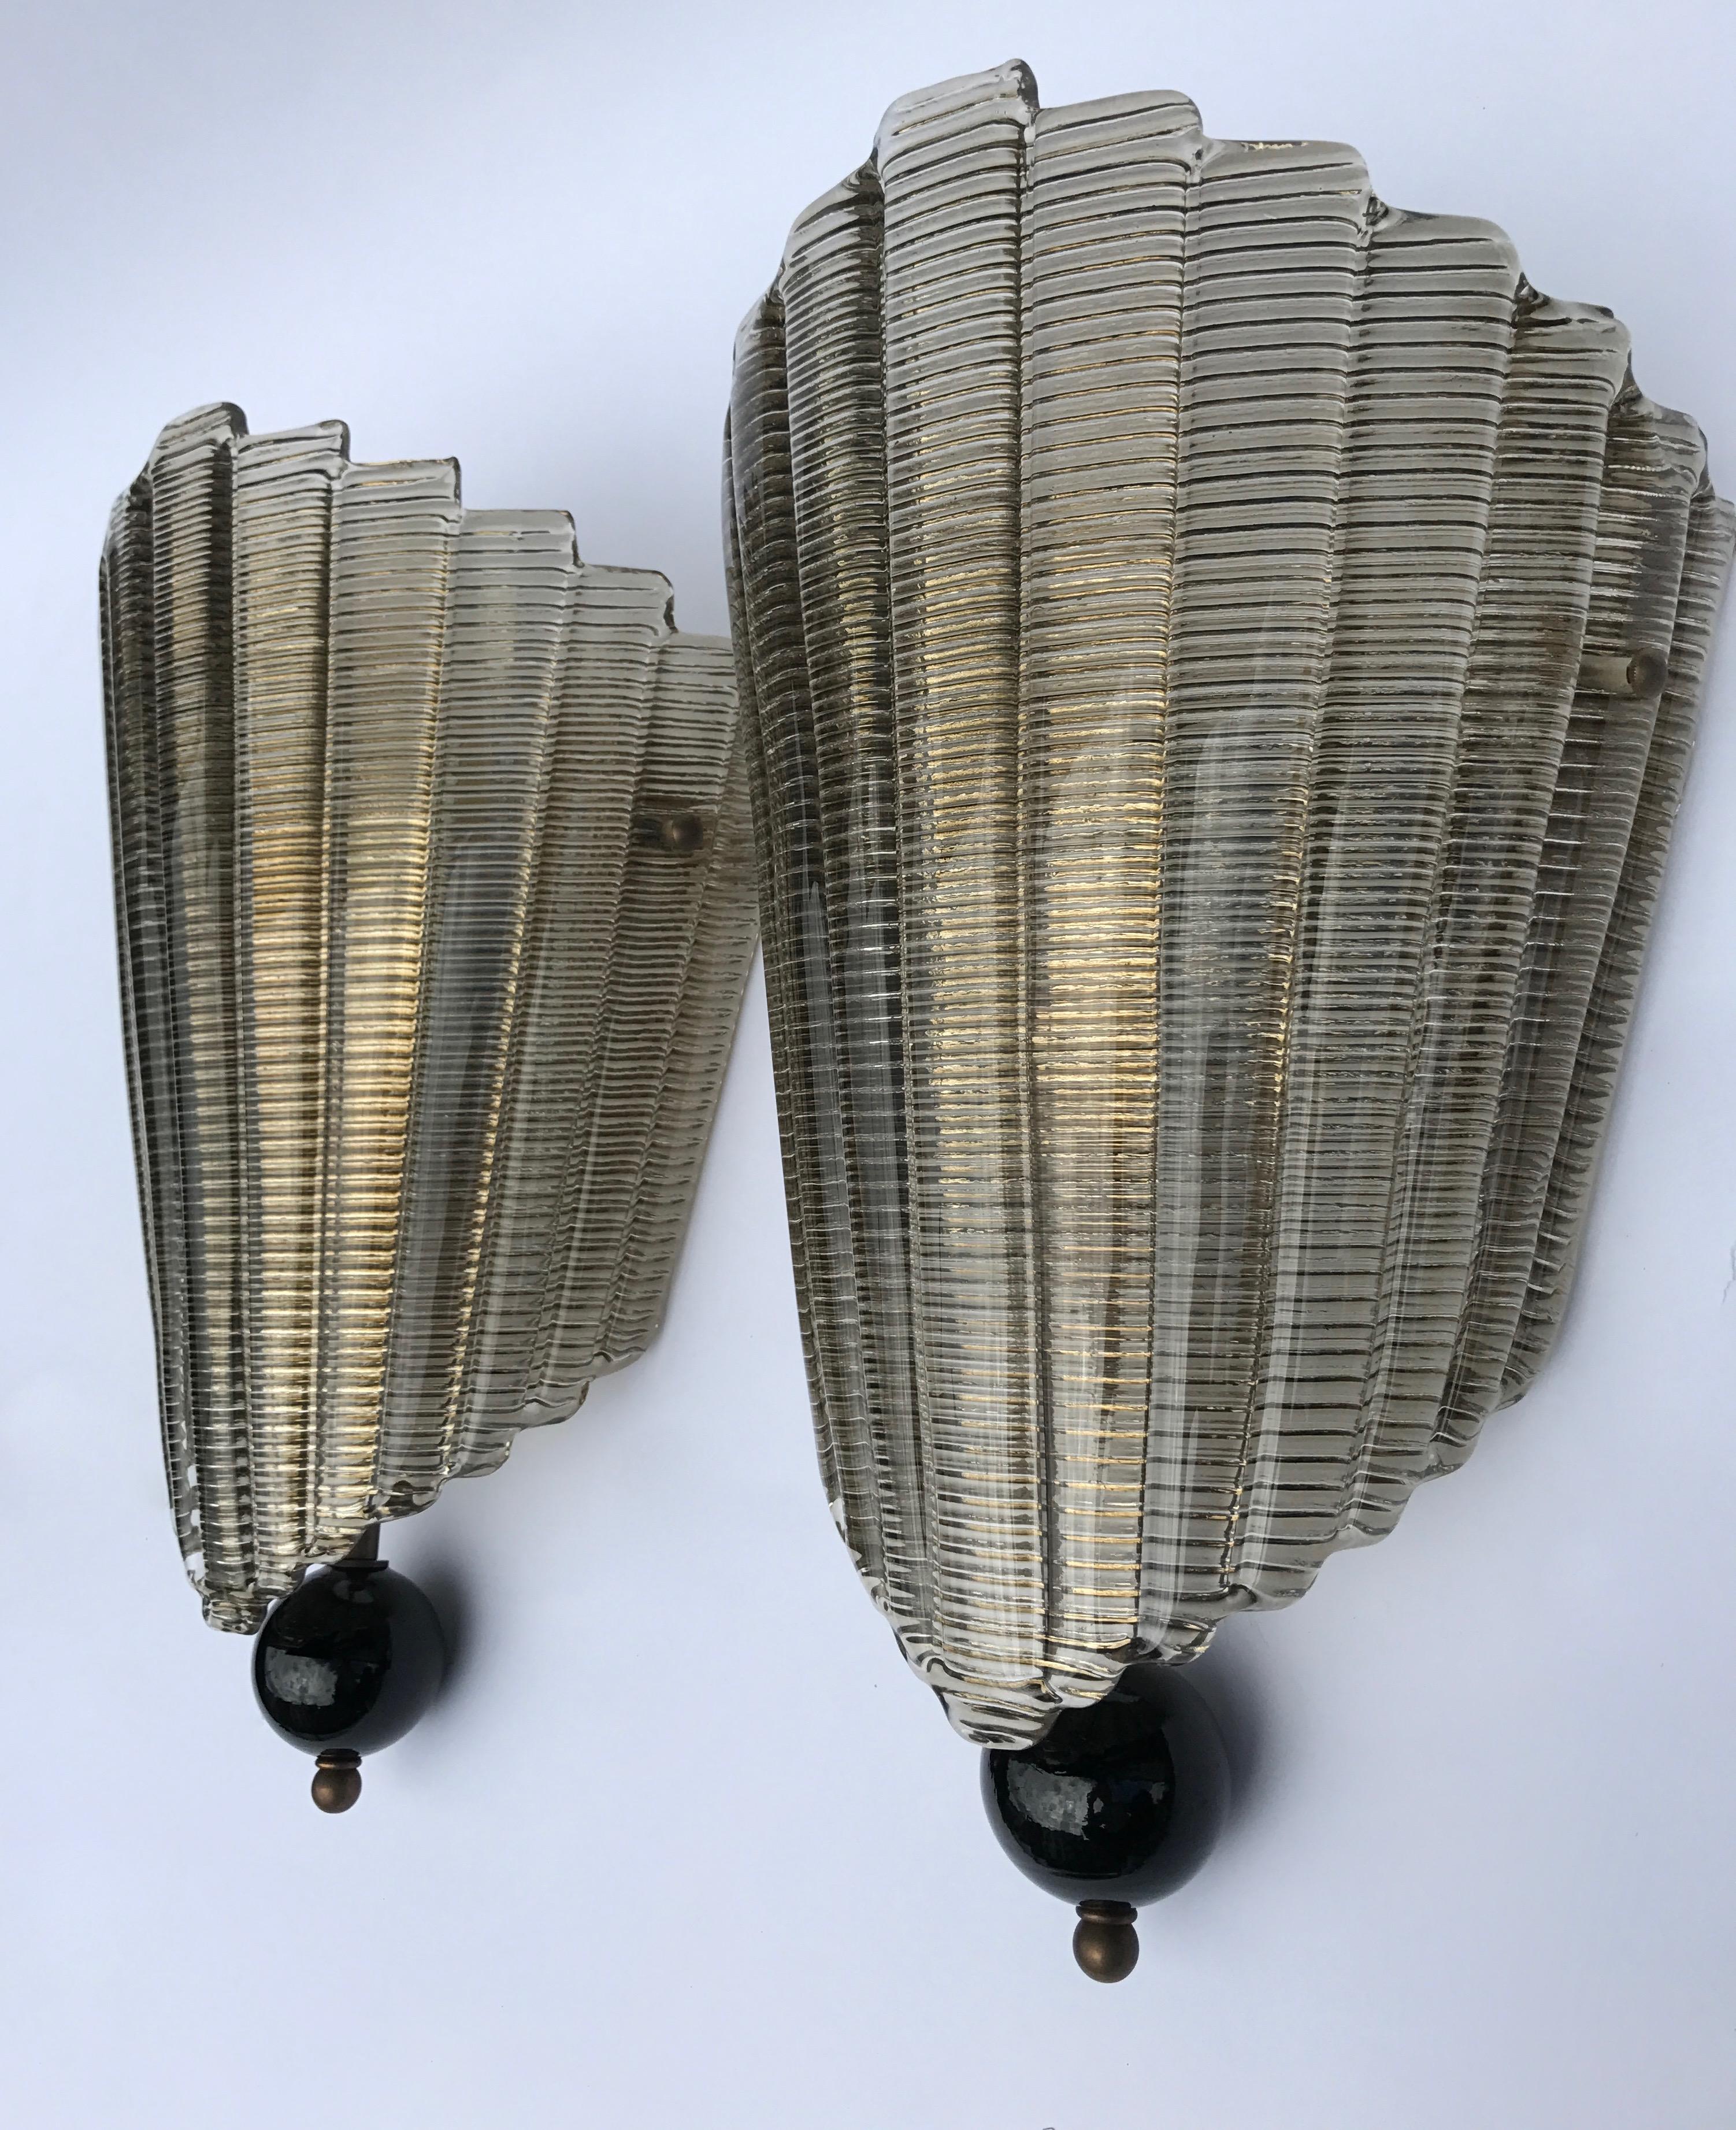 Fan-shaped Murano glass is simply attached via two brass screw fixings to the wall bracket to make this beautiful but effective Art Deco style sconce.
The glass has etchings that give the glass a gold appearance when the light reflects. This piece